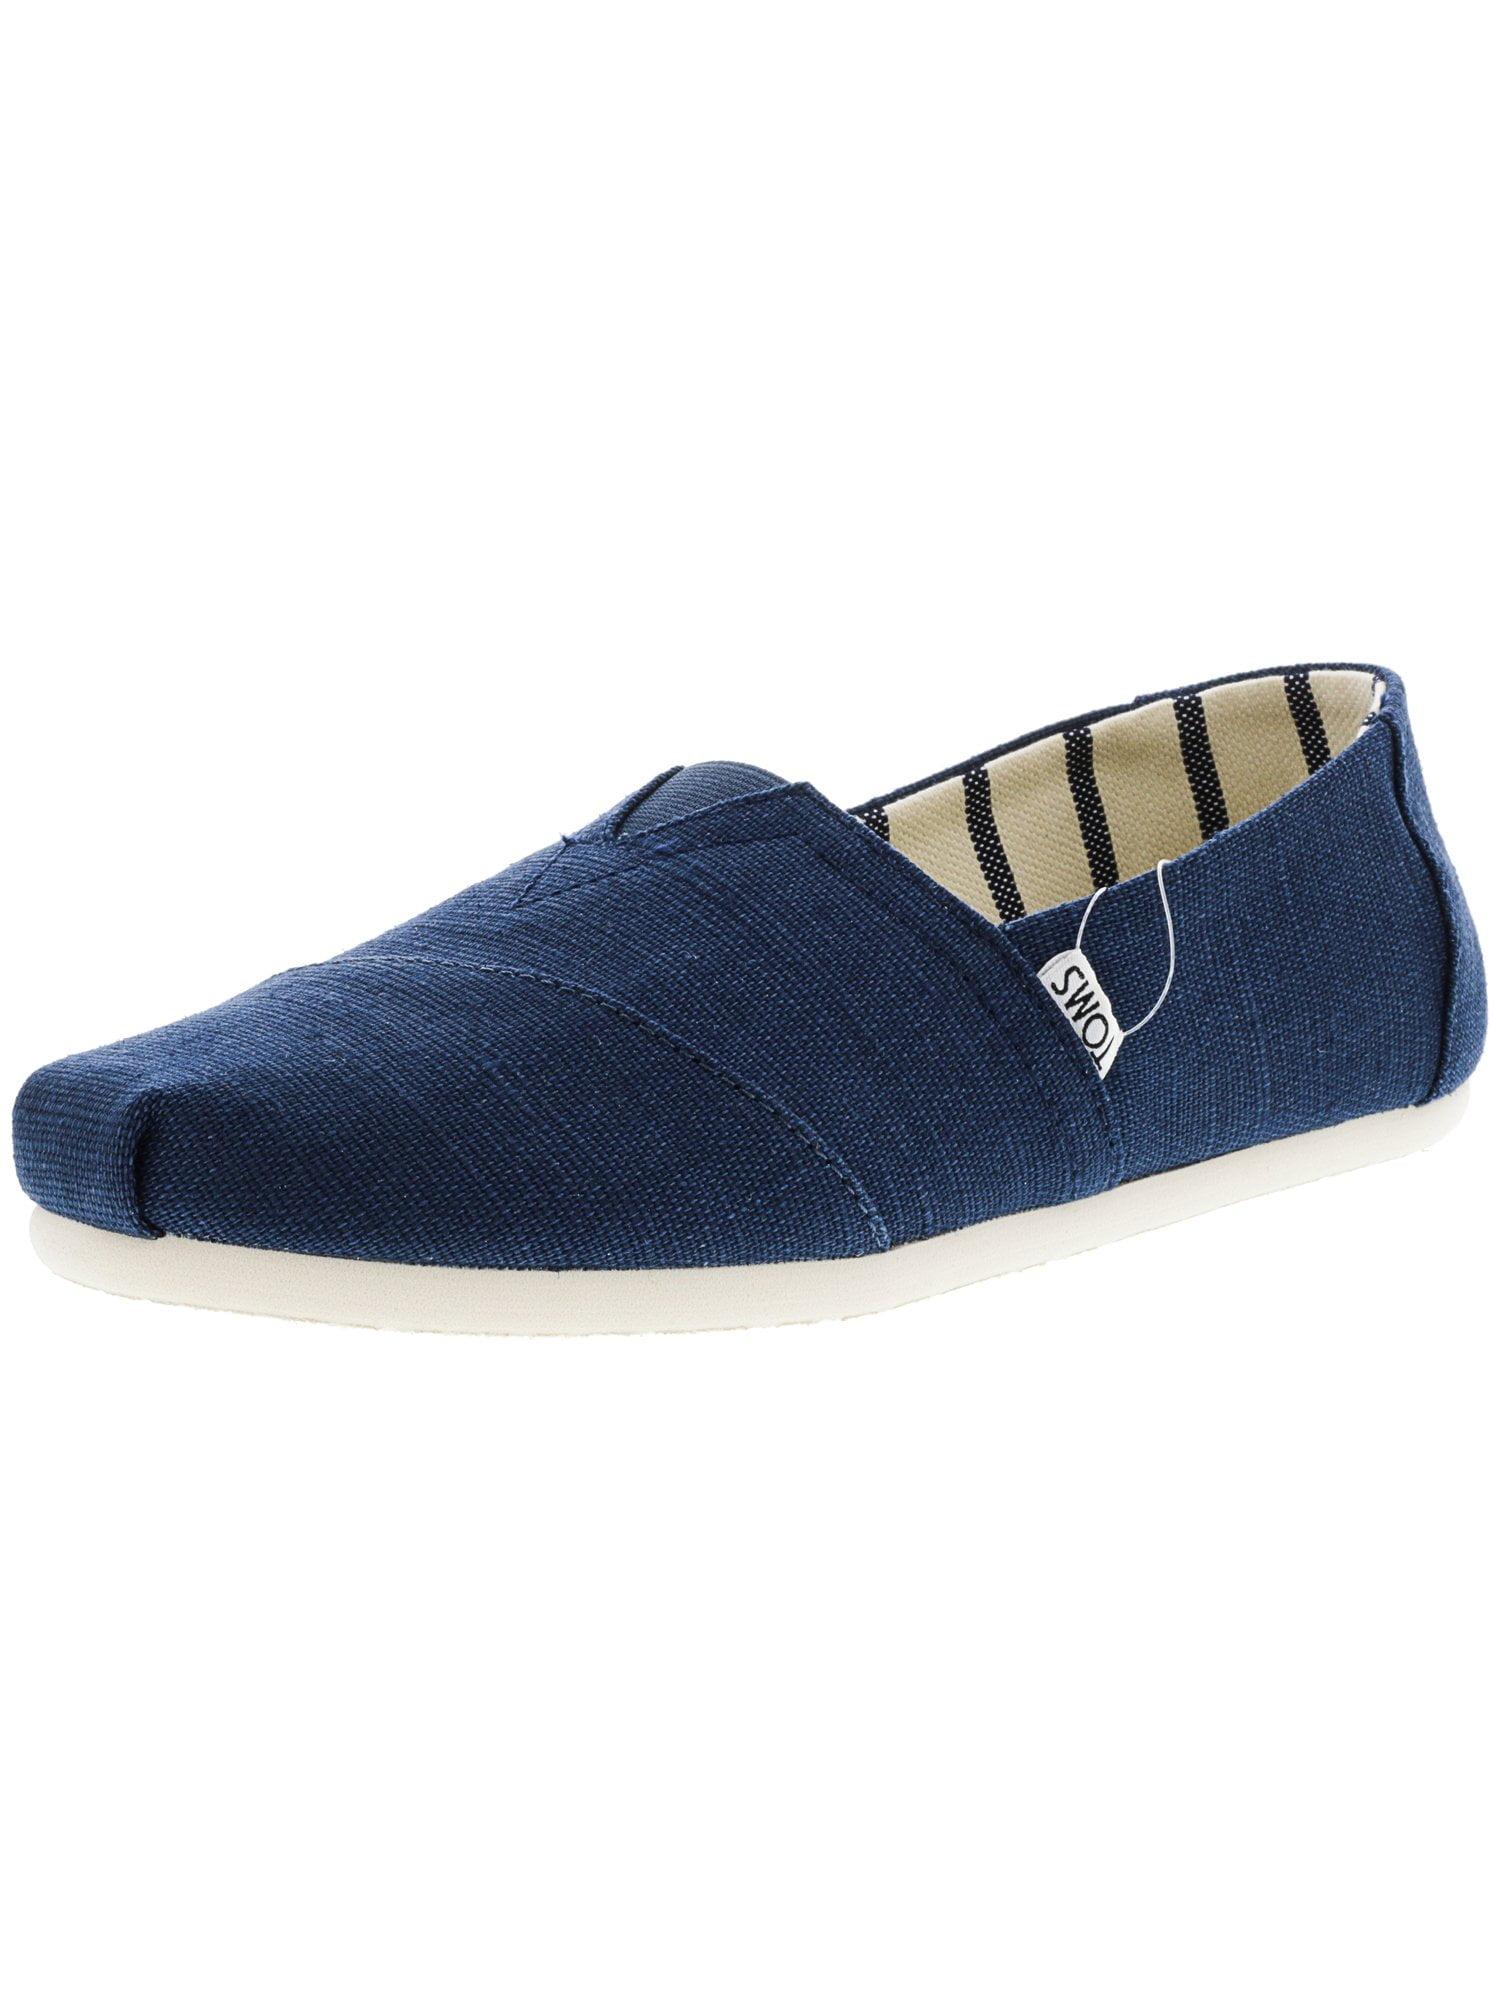 Toms Men's Classic Heritage Canvas Majolica Blue Ankle-High Slip-On ...